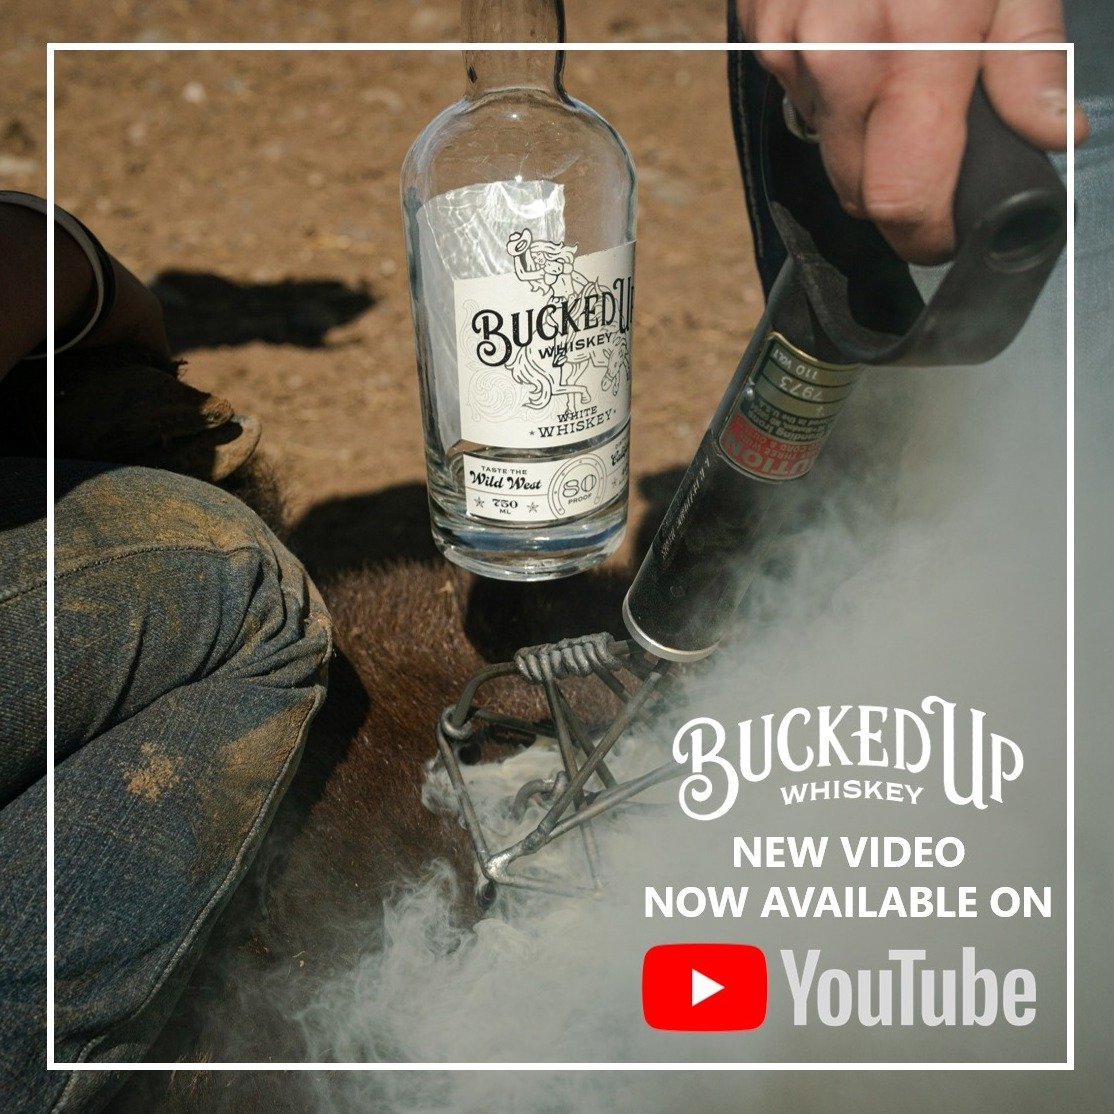 Our latest video, &quot;Some TALK about it, others LIVE it.&quot;, is now available for viewing on YouTube. If you prefer to drink foreign whiskey at American rodeos, then this isn&rsquo;t the whiskey brand for you. Cheers!

https://youtu.be/QsjBblLV